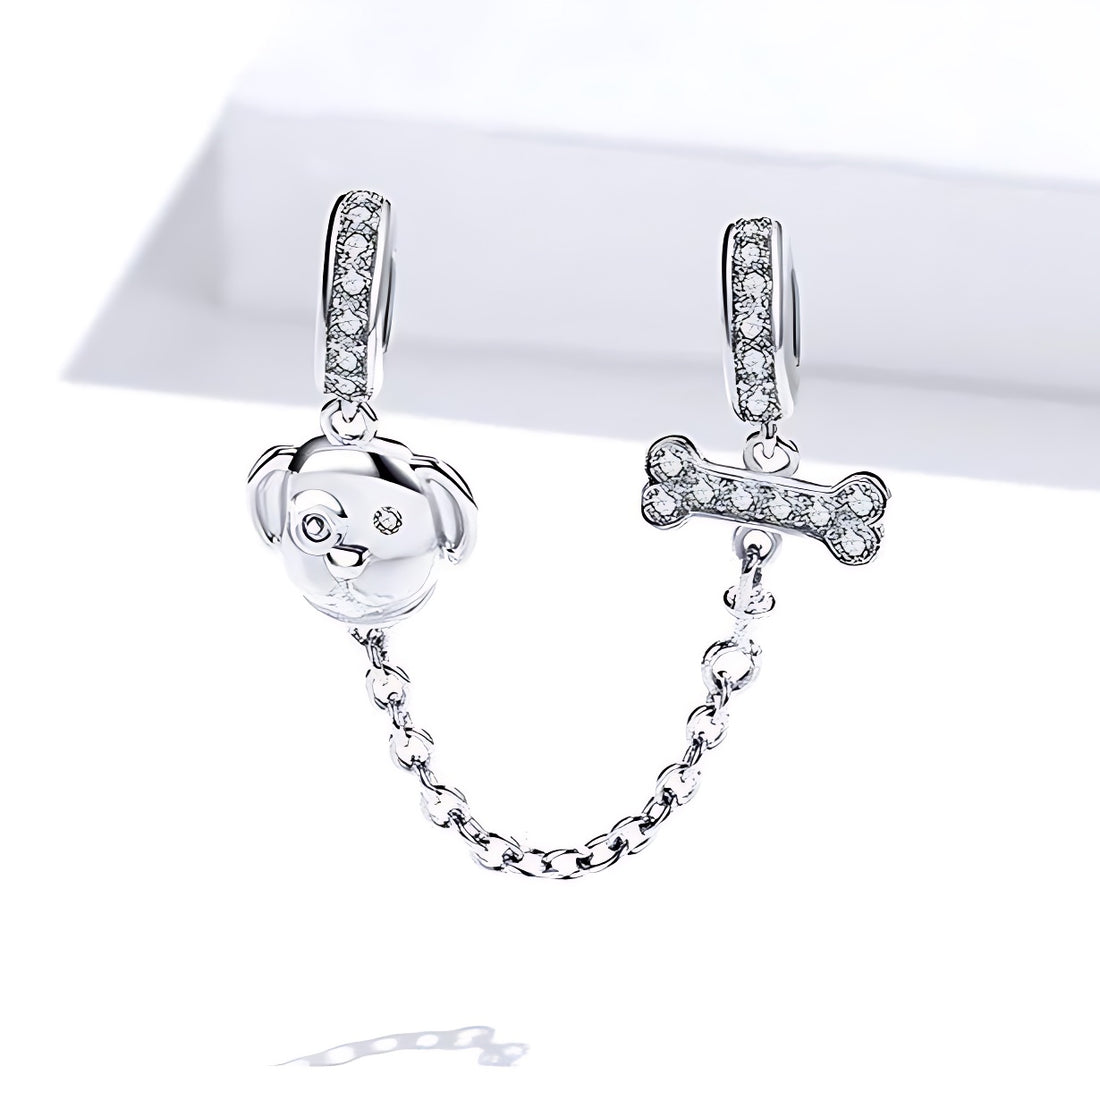 100% 925 Sterling Silver Dog Love Bone Zircon Pendant Charm Jewelry WFS55 Without Chain - Touchy Style .